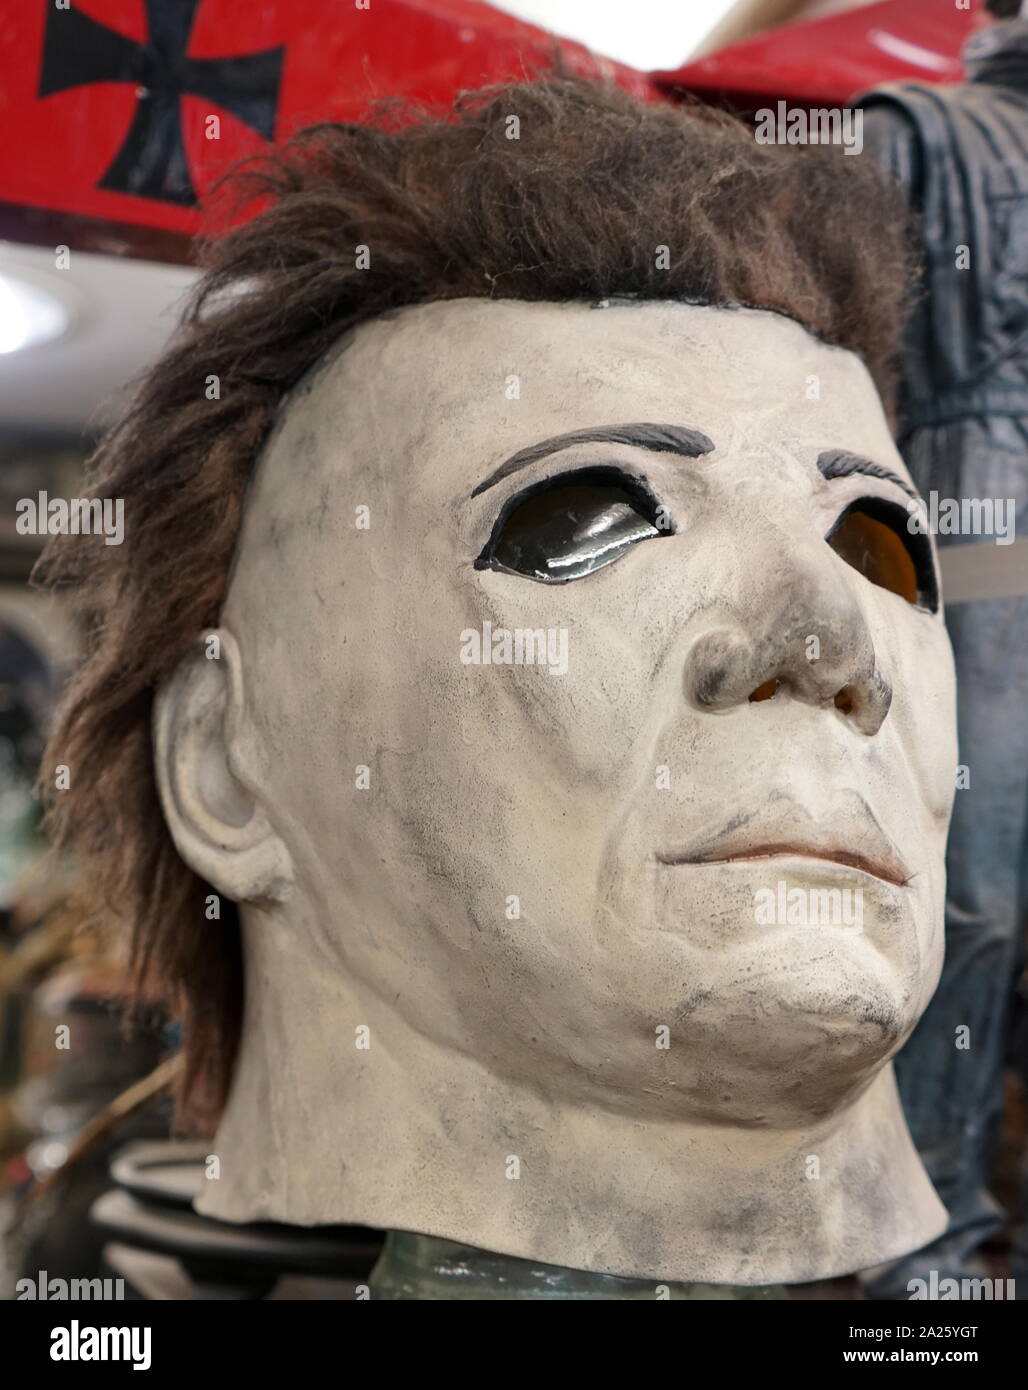 One of the masks used in the Halloween horror films. Halloween (1978) was Jamie Lee Curtis' film debut. Jamie Lee Haden-Guest, Baroness Haden-Gues (1958-) an American actress, author, and activist. Stock Photo